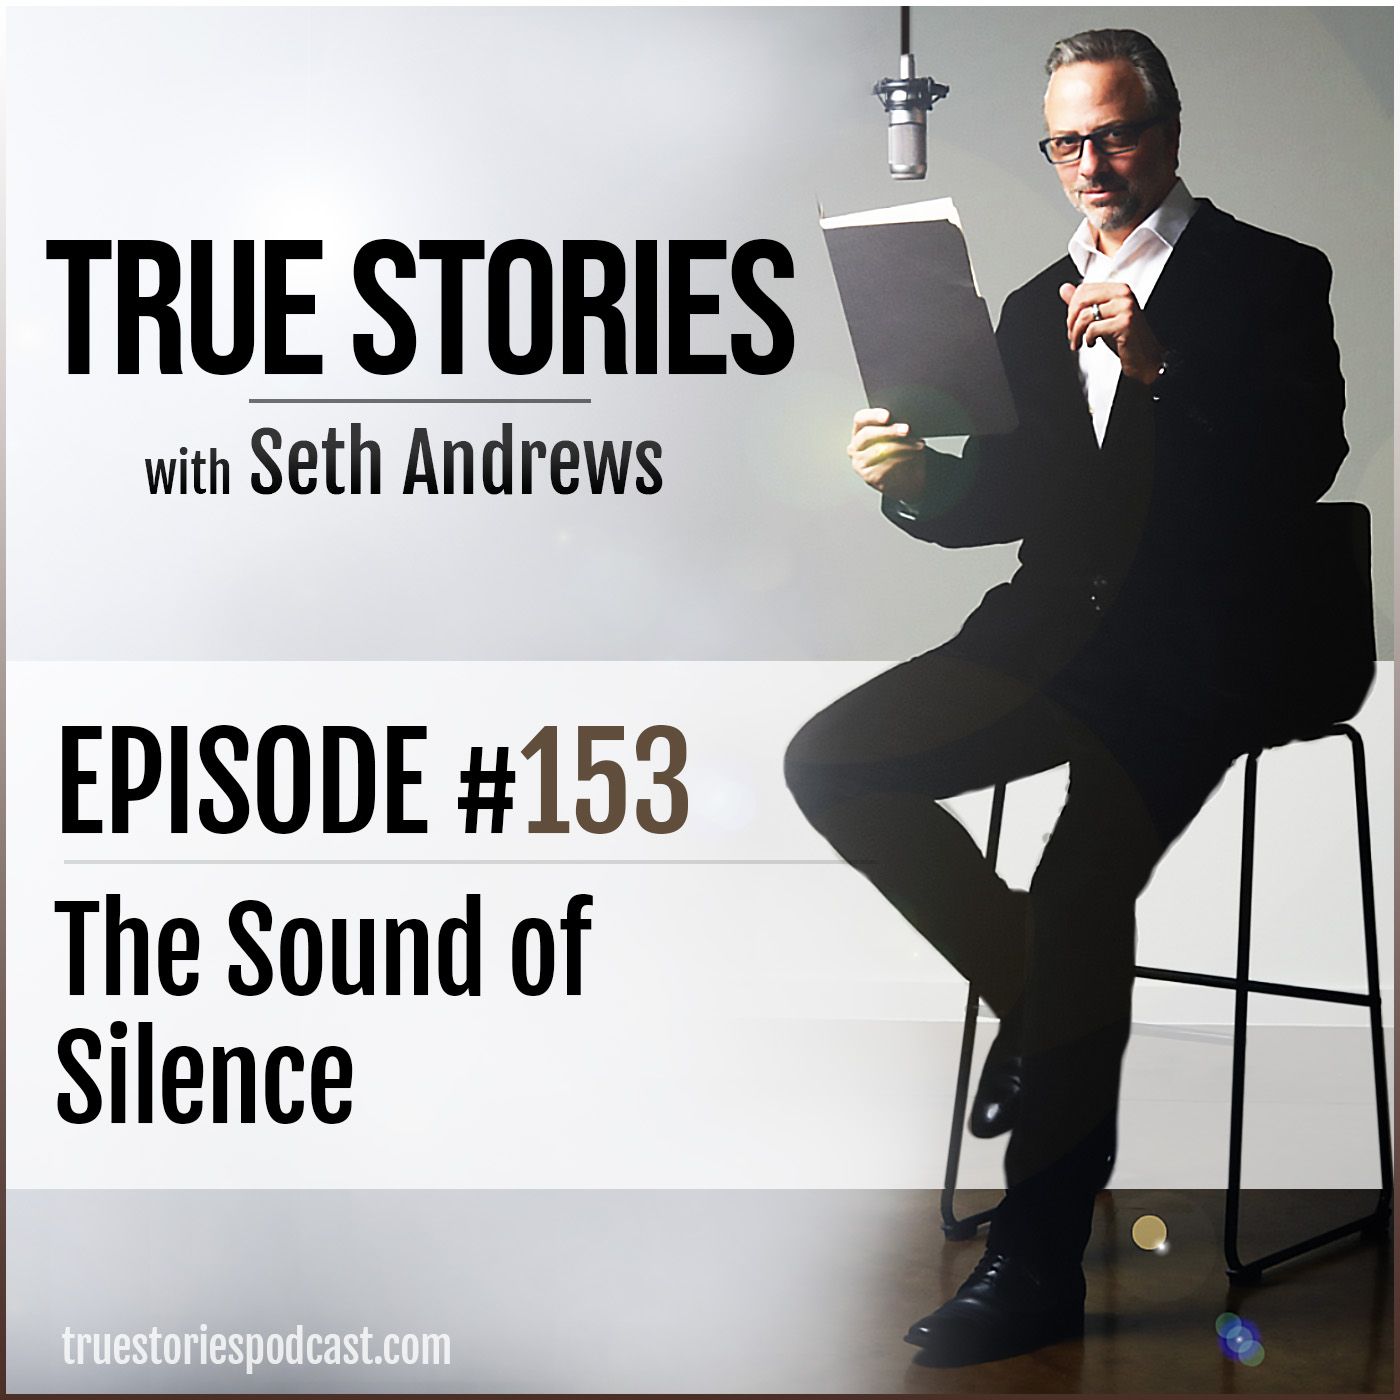 True Stories #153 - The Sound of Silence